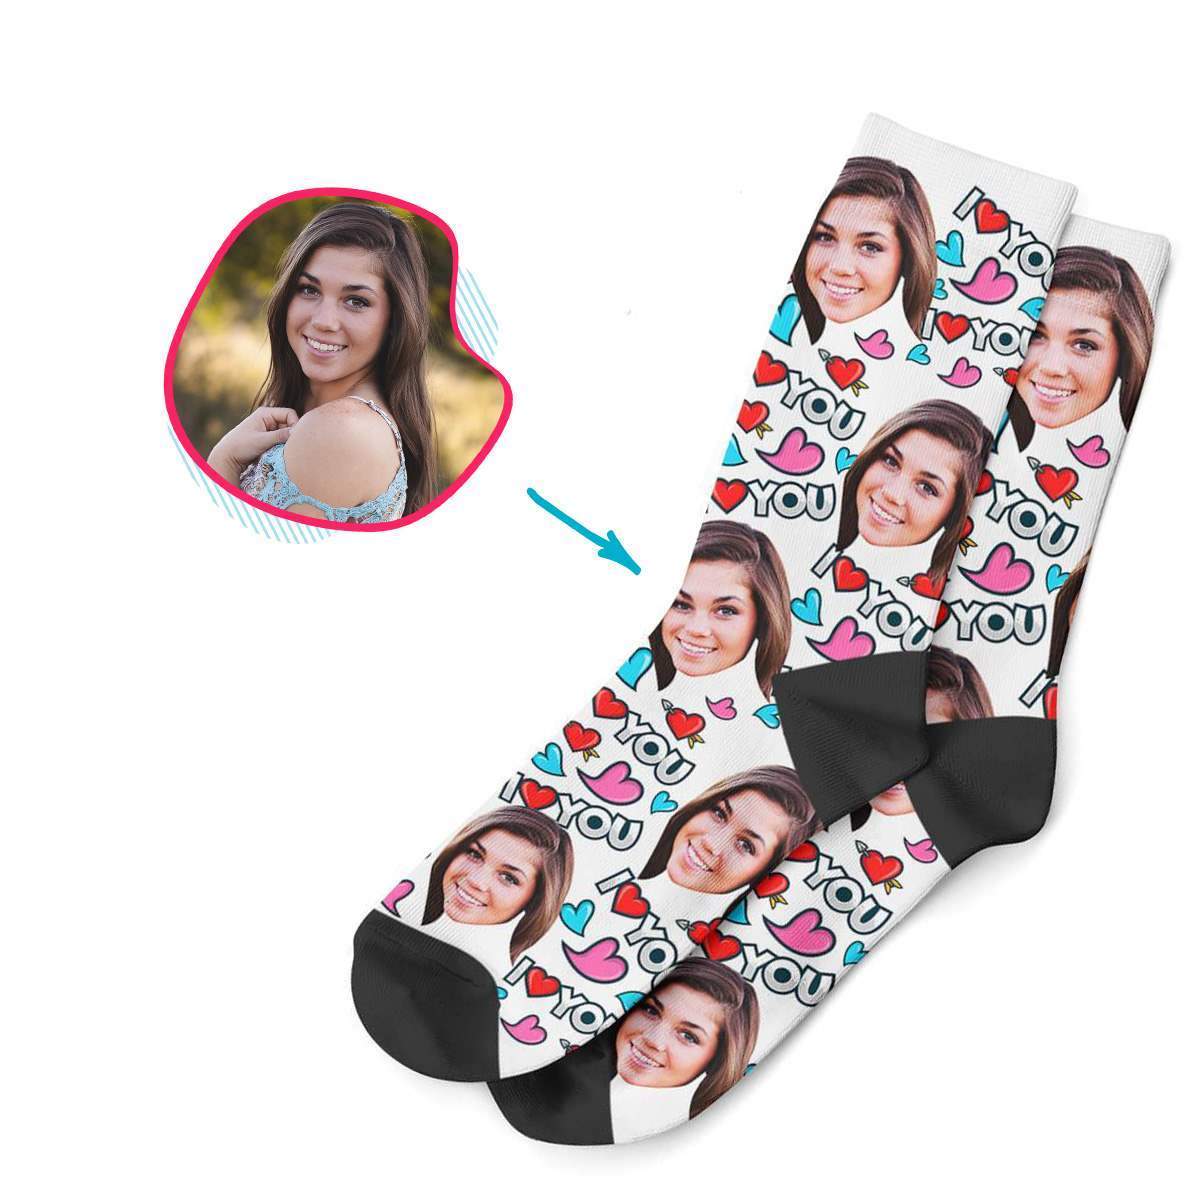 white Love You socks personalized with photo of face printed on them